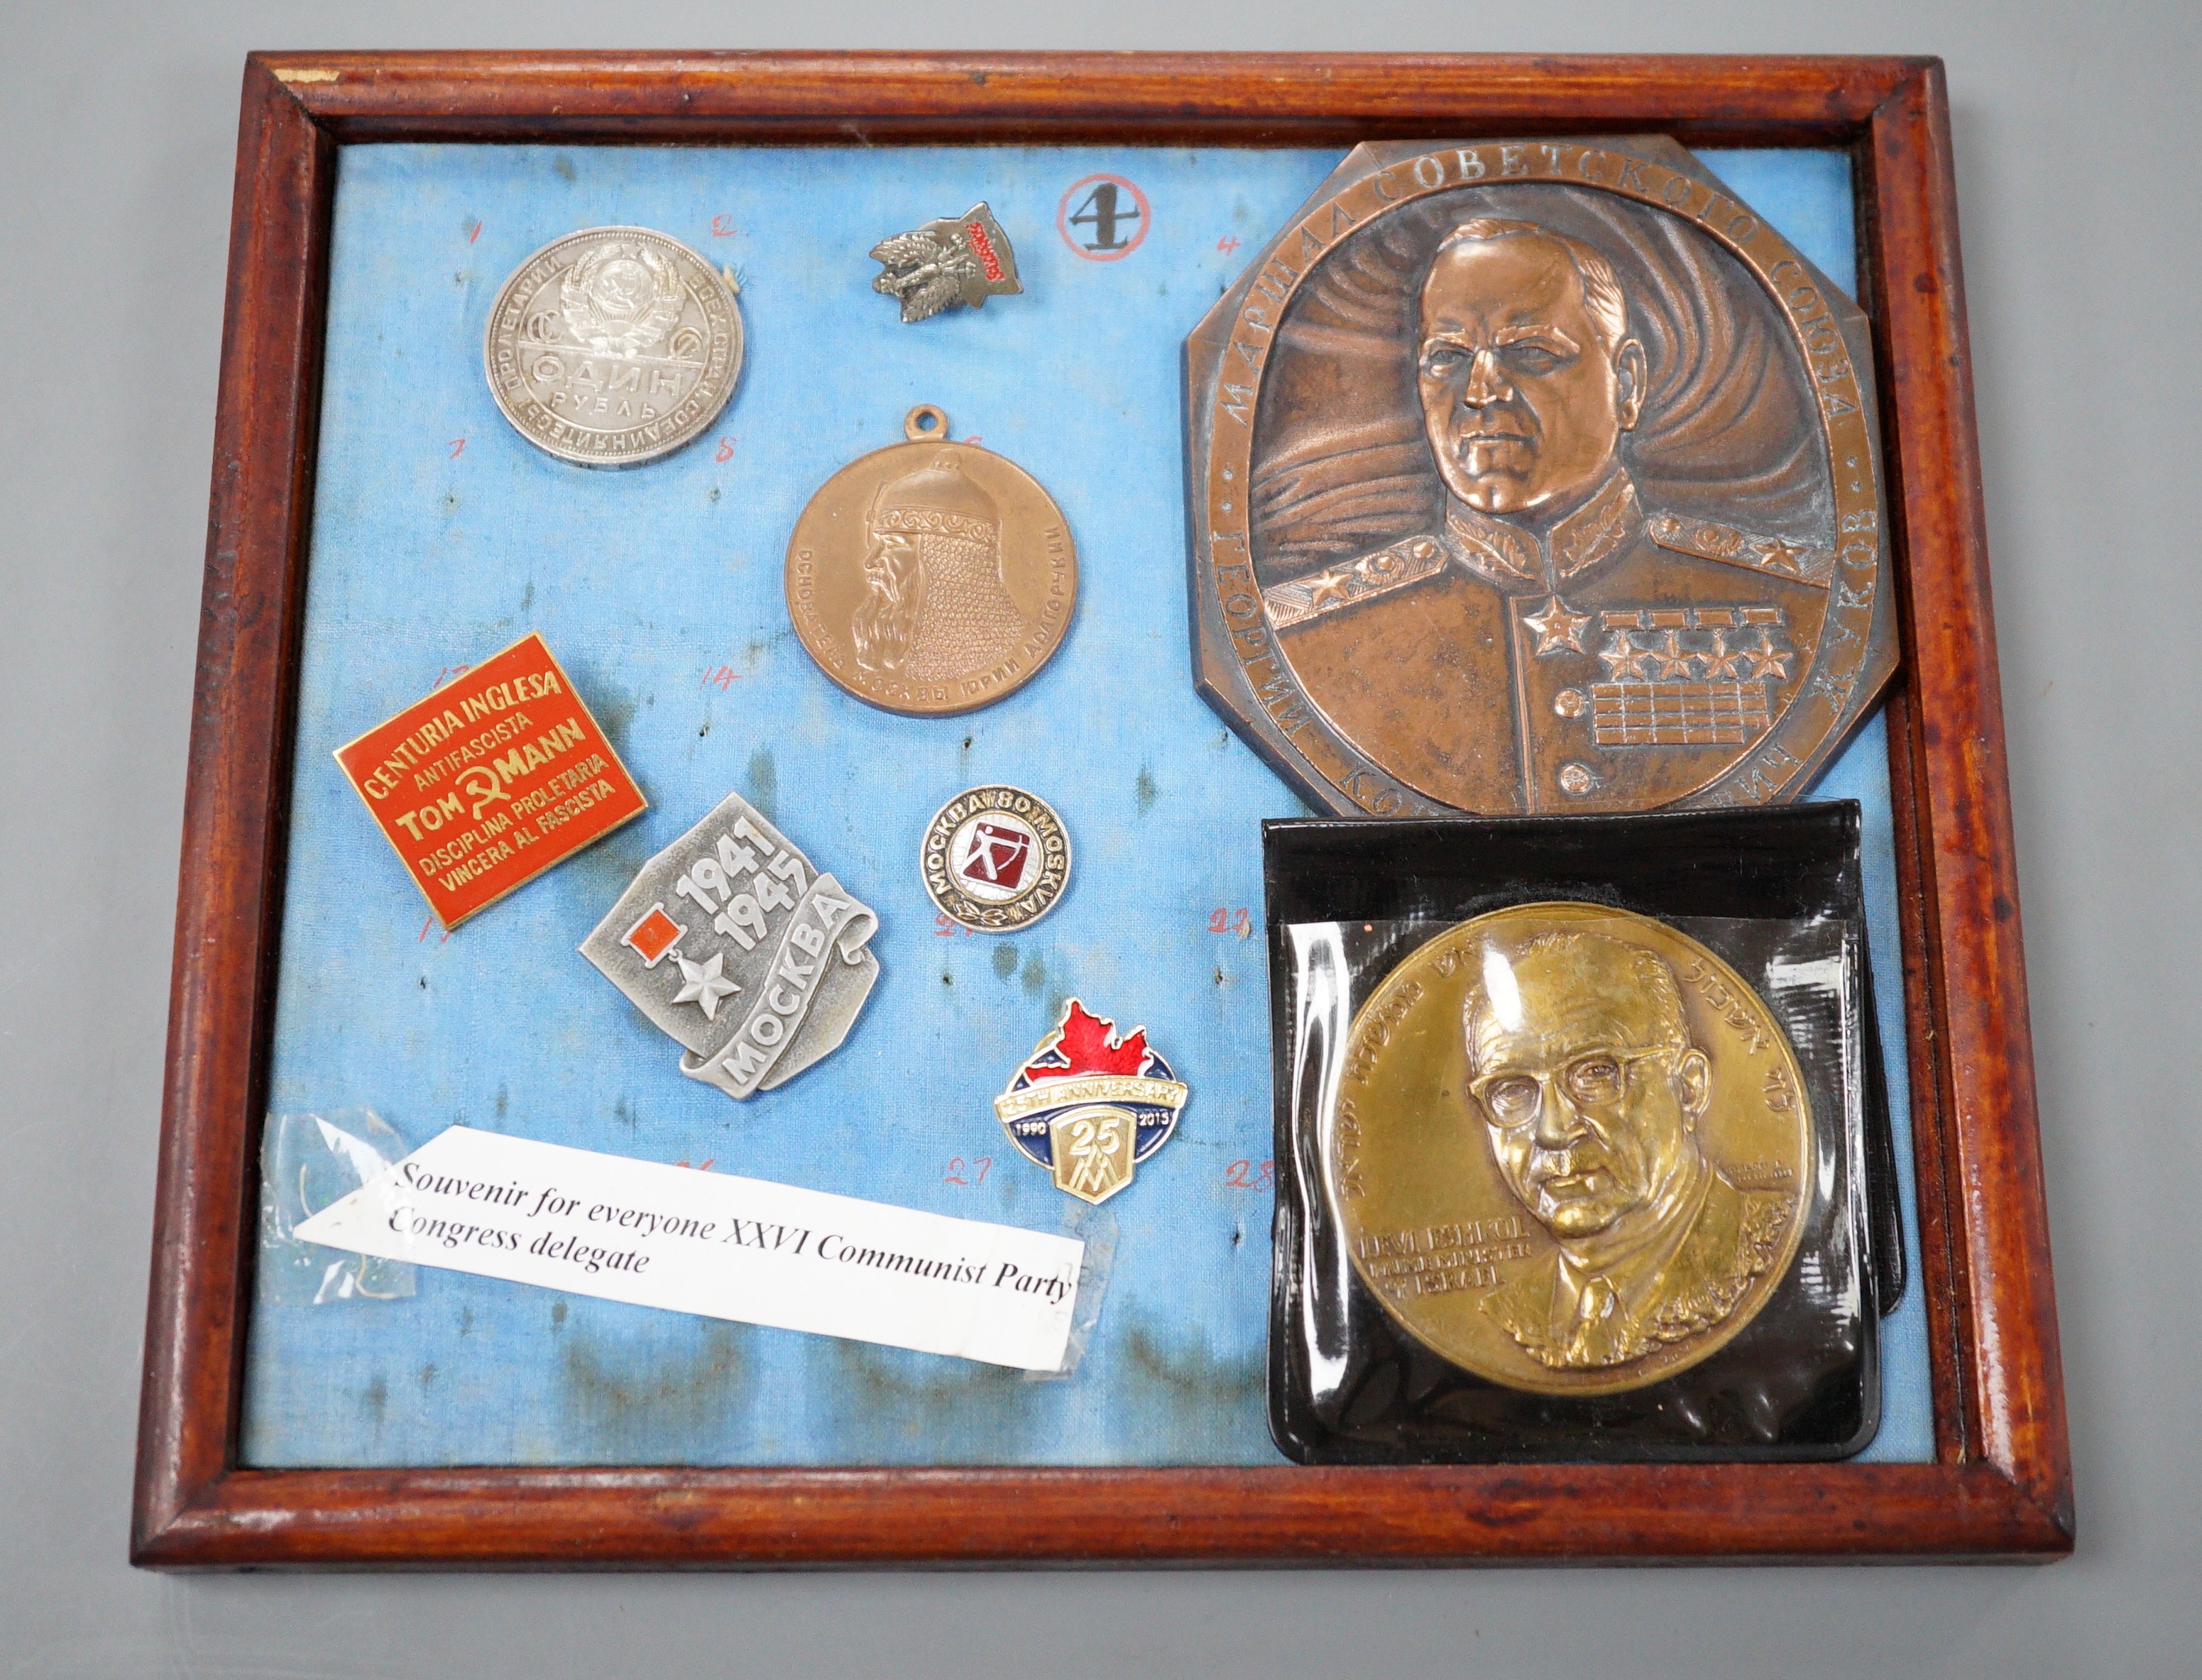 Soviet Union coin, medals, Communist Party badges and Israel commemorative coins and medals